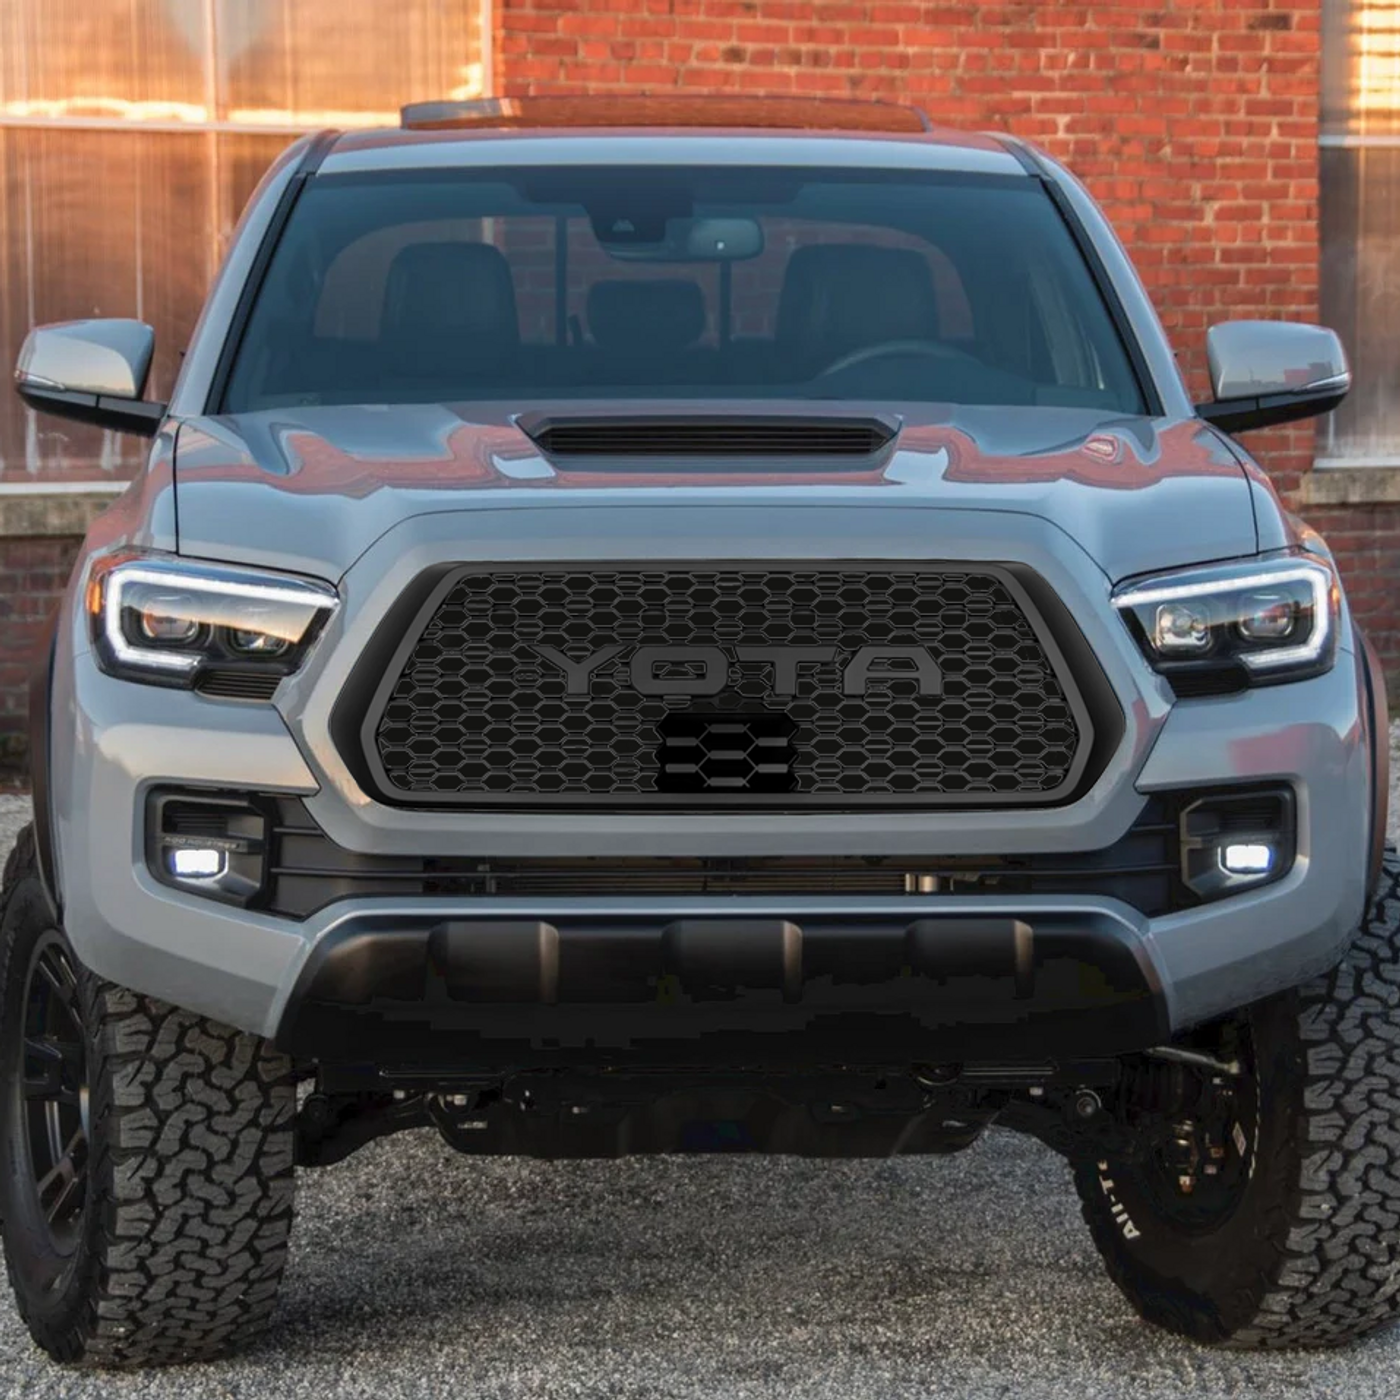 Image of Honeycomb Toyota Grille with Raptor Lights for 3rd Gen Toyota Tacoma (2016+).